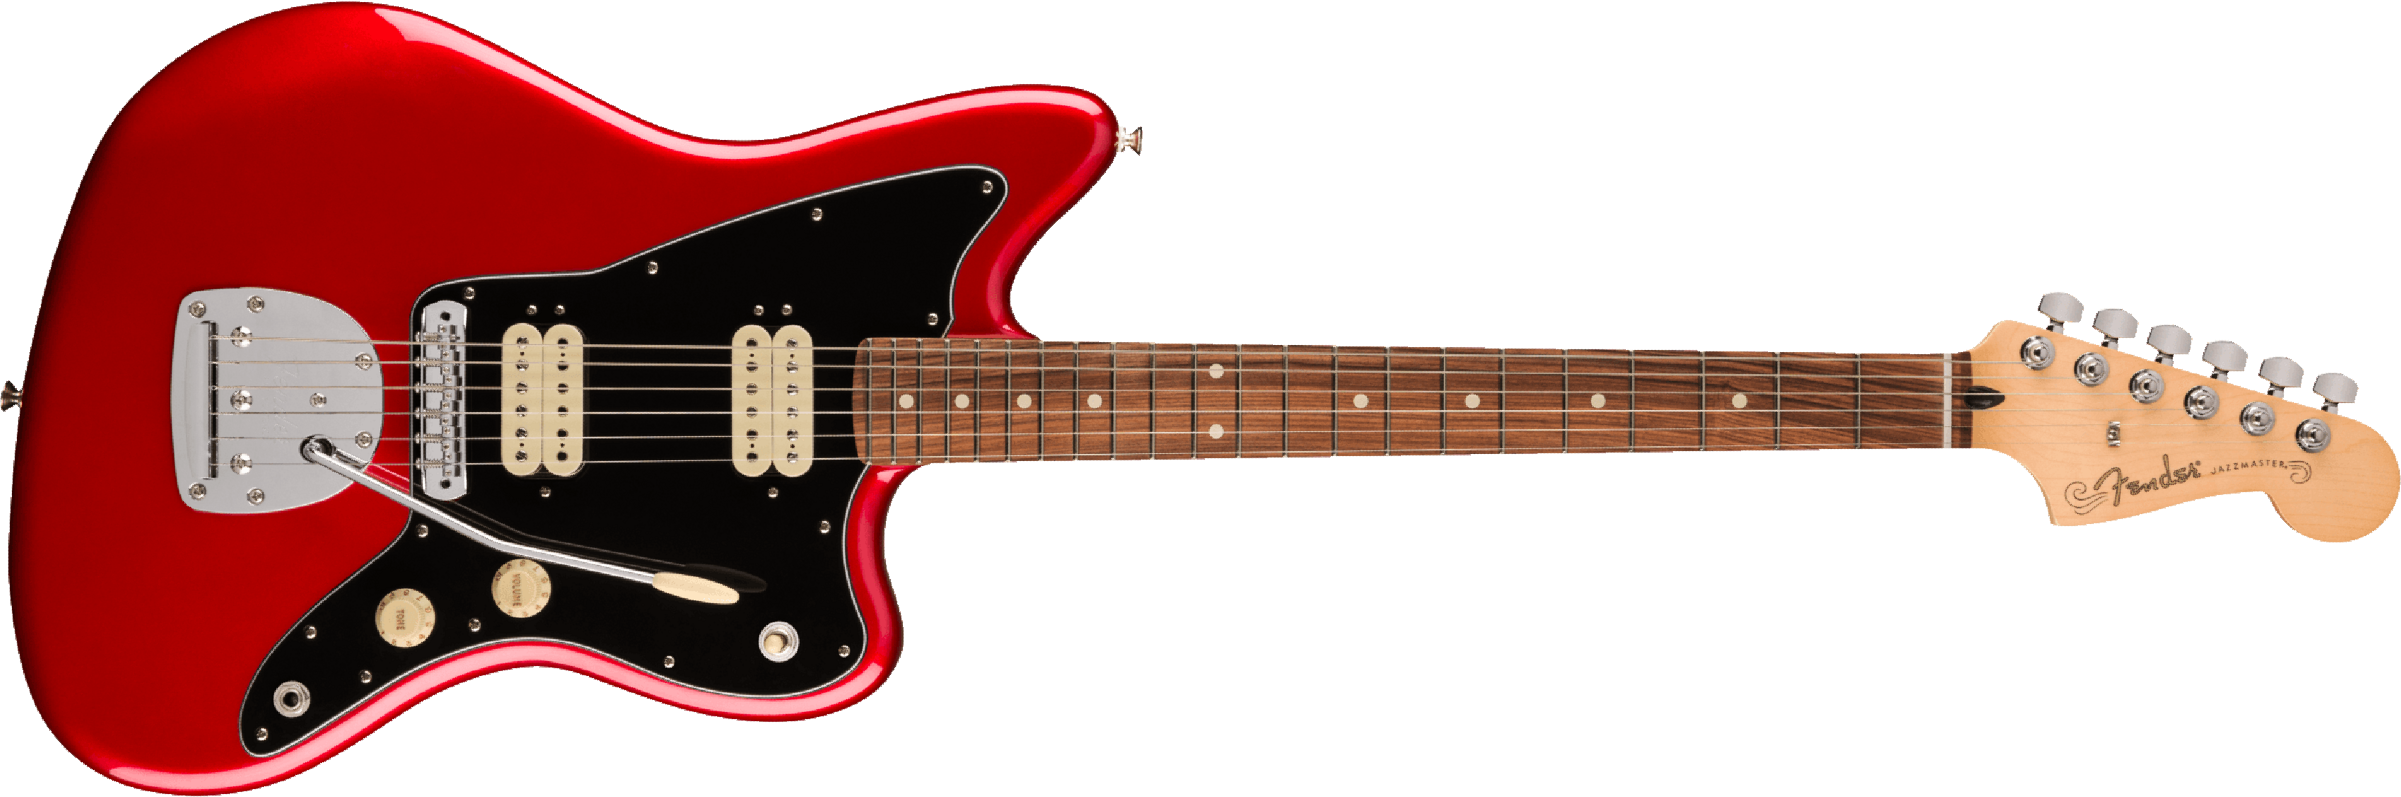 Fender Jazzmaster Player Hh Mex 2023 Trem 2h Pf - Candy Apple Red - Guitarra electrica retro rock - Main picture